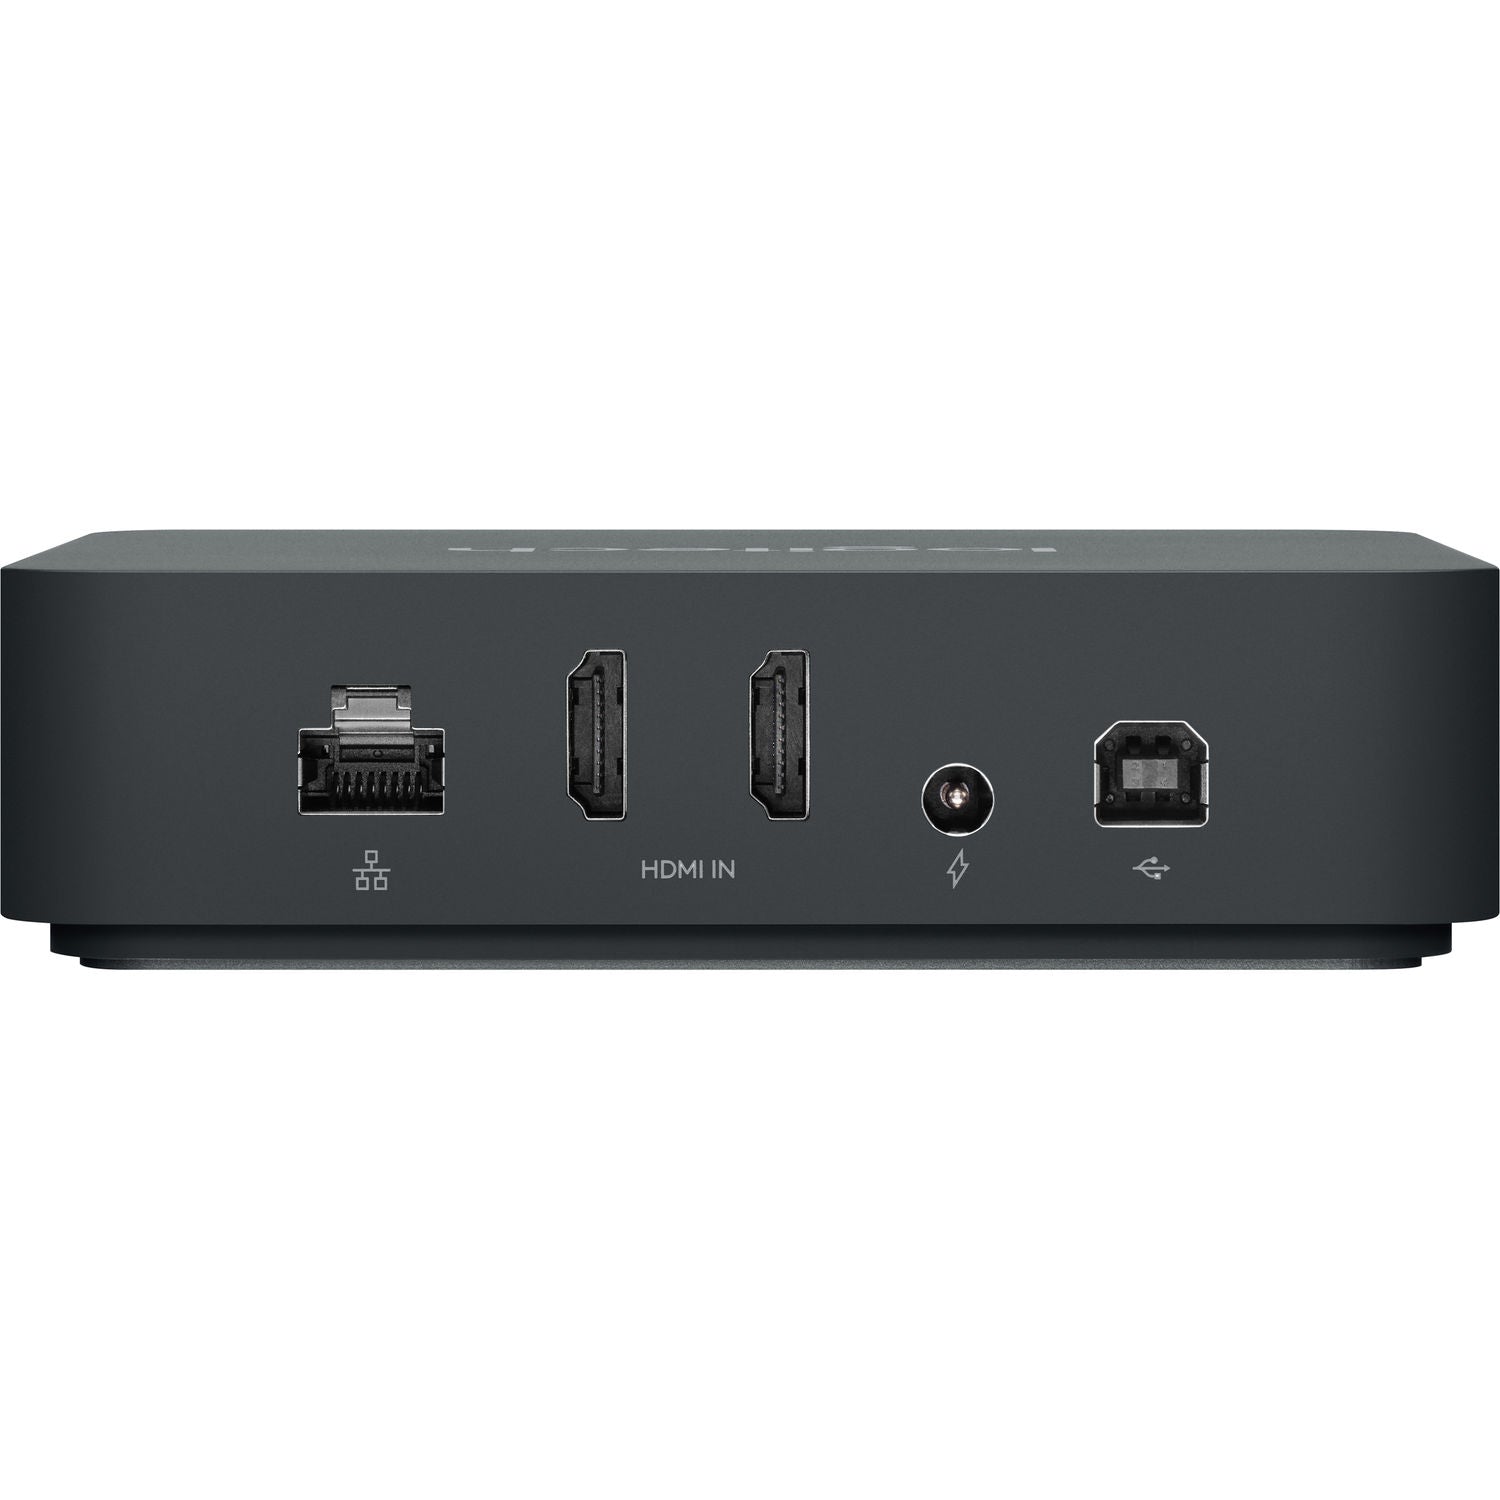 Logitec Smart Dock Extender Box with 5-in-1 Cable